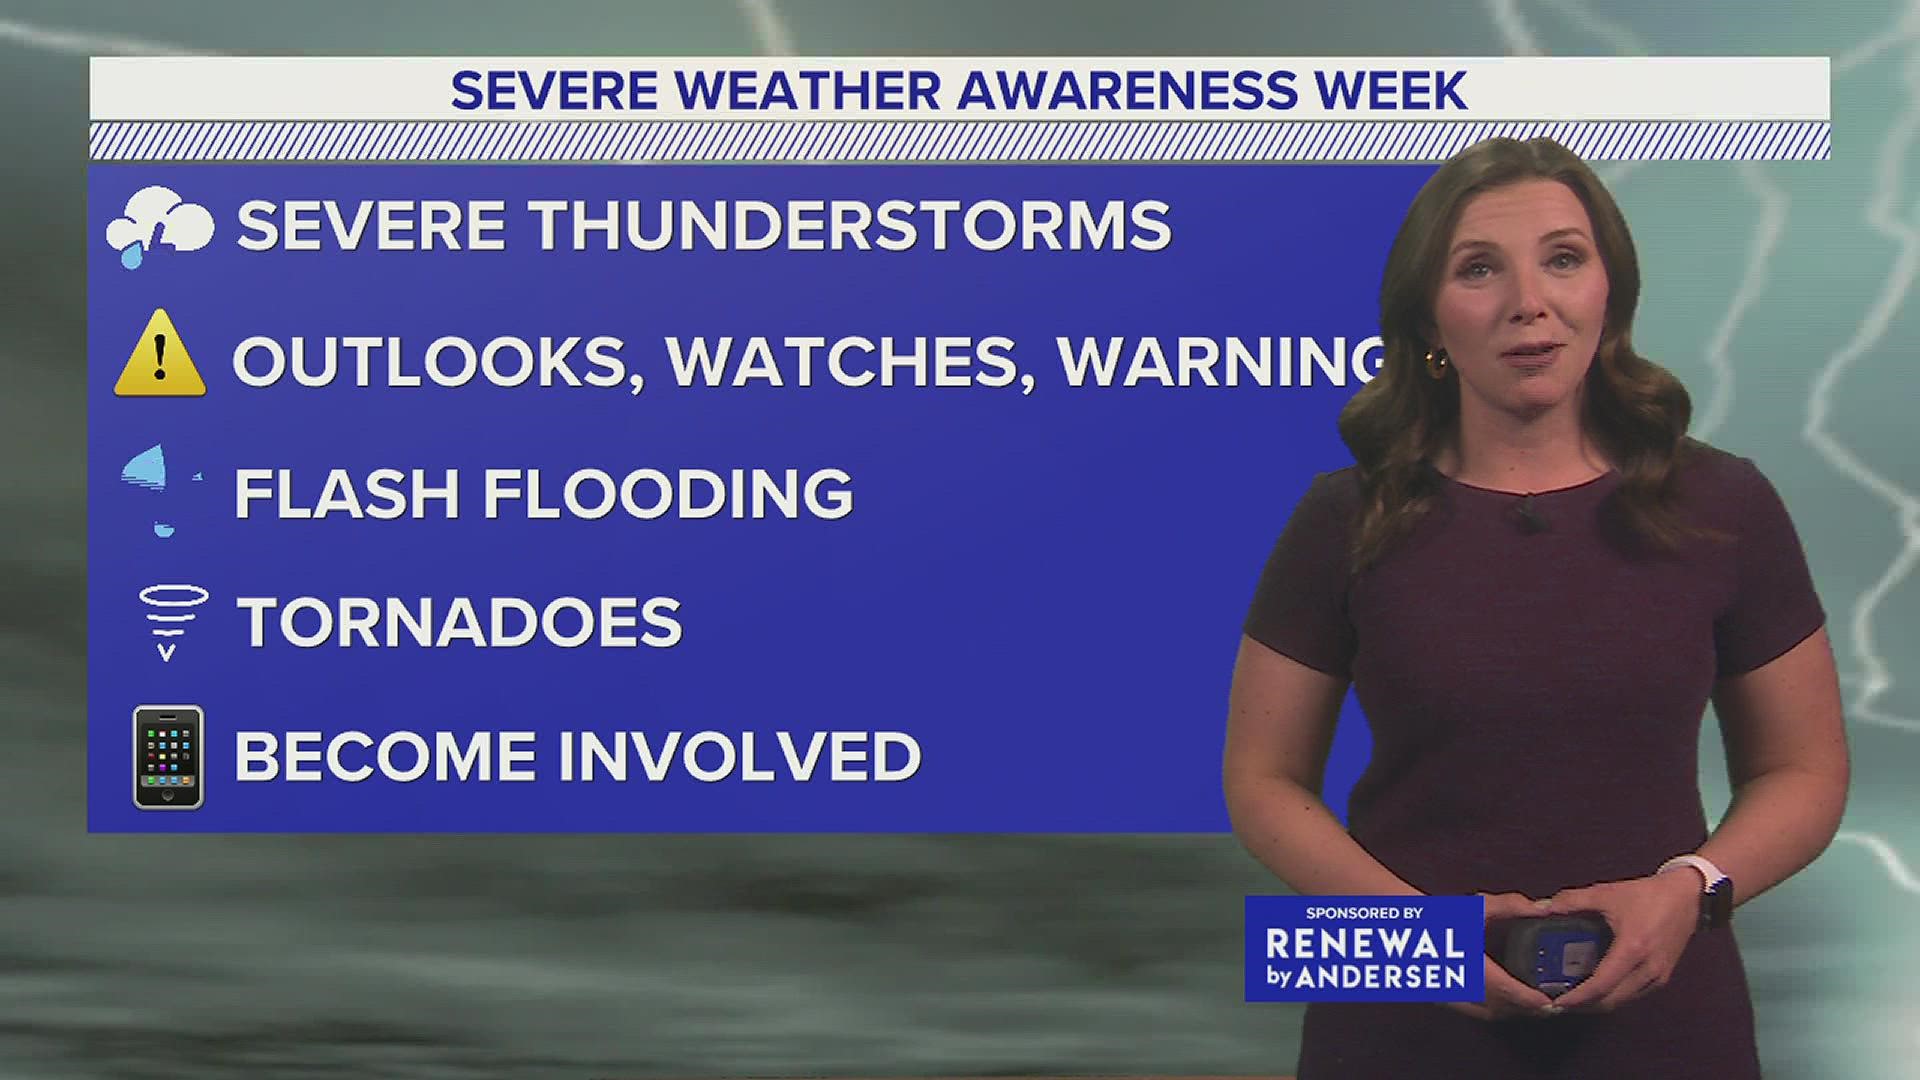 The National Weather Service and PEMA use the week to educate people on different types of severe weather and how to stay safe.